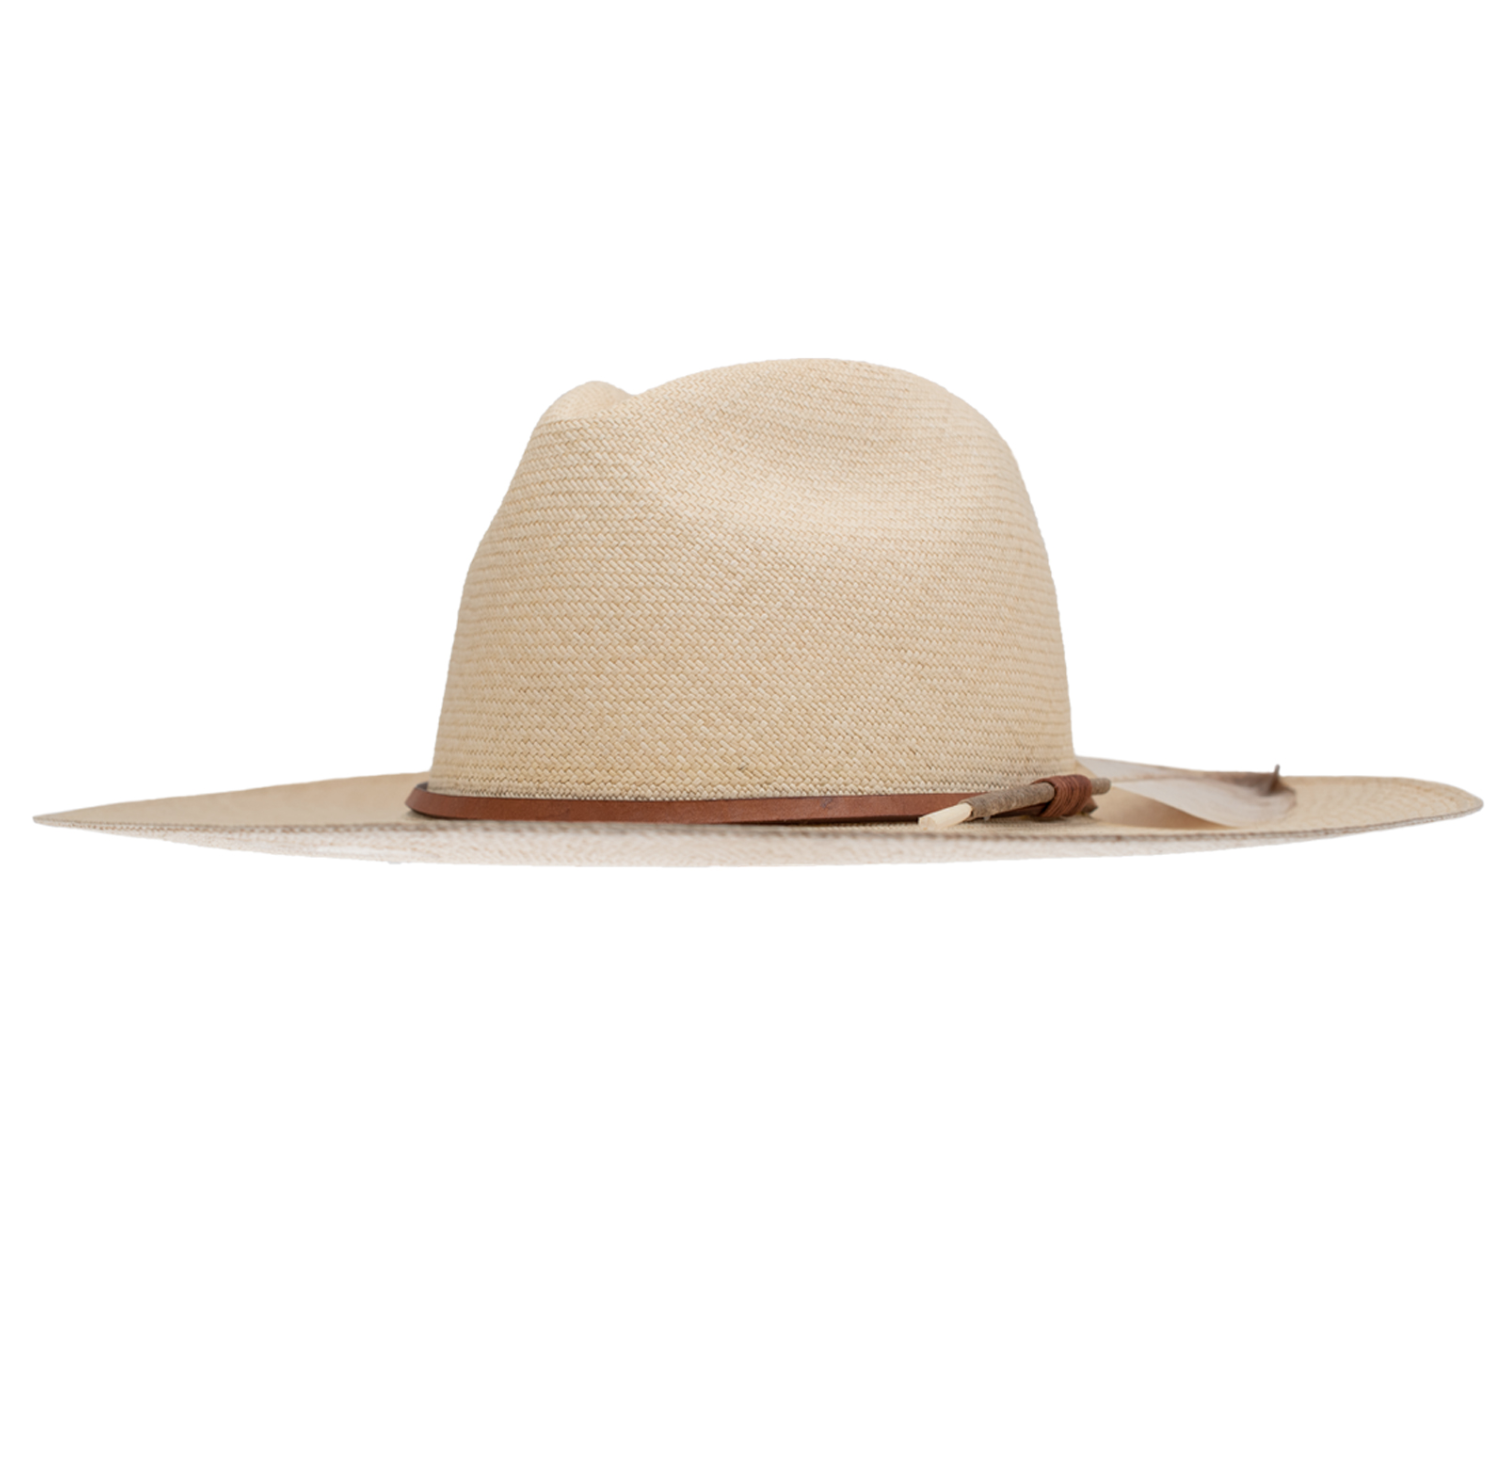 A wide-brimmed Ninakuru Matteo Extra Long Brim S/M hat made from sustainably harvested oquilla straw with a beige color and brown leather band around the base, isolated on a white background.